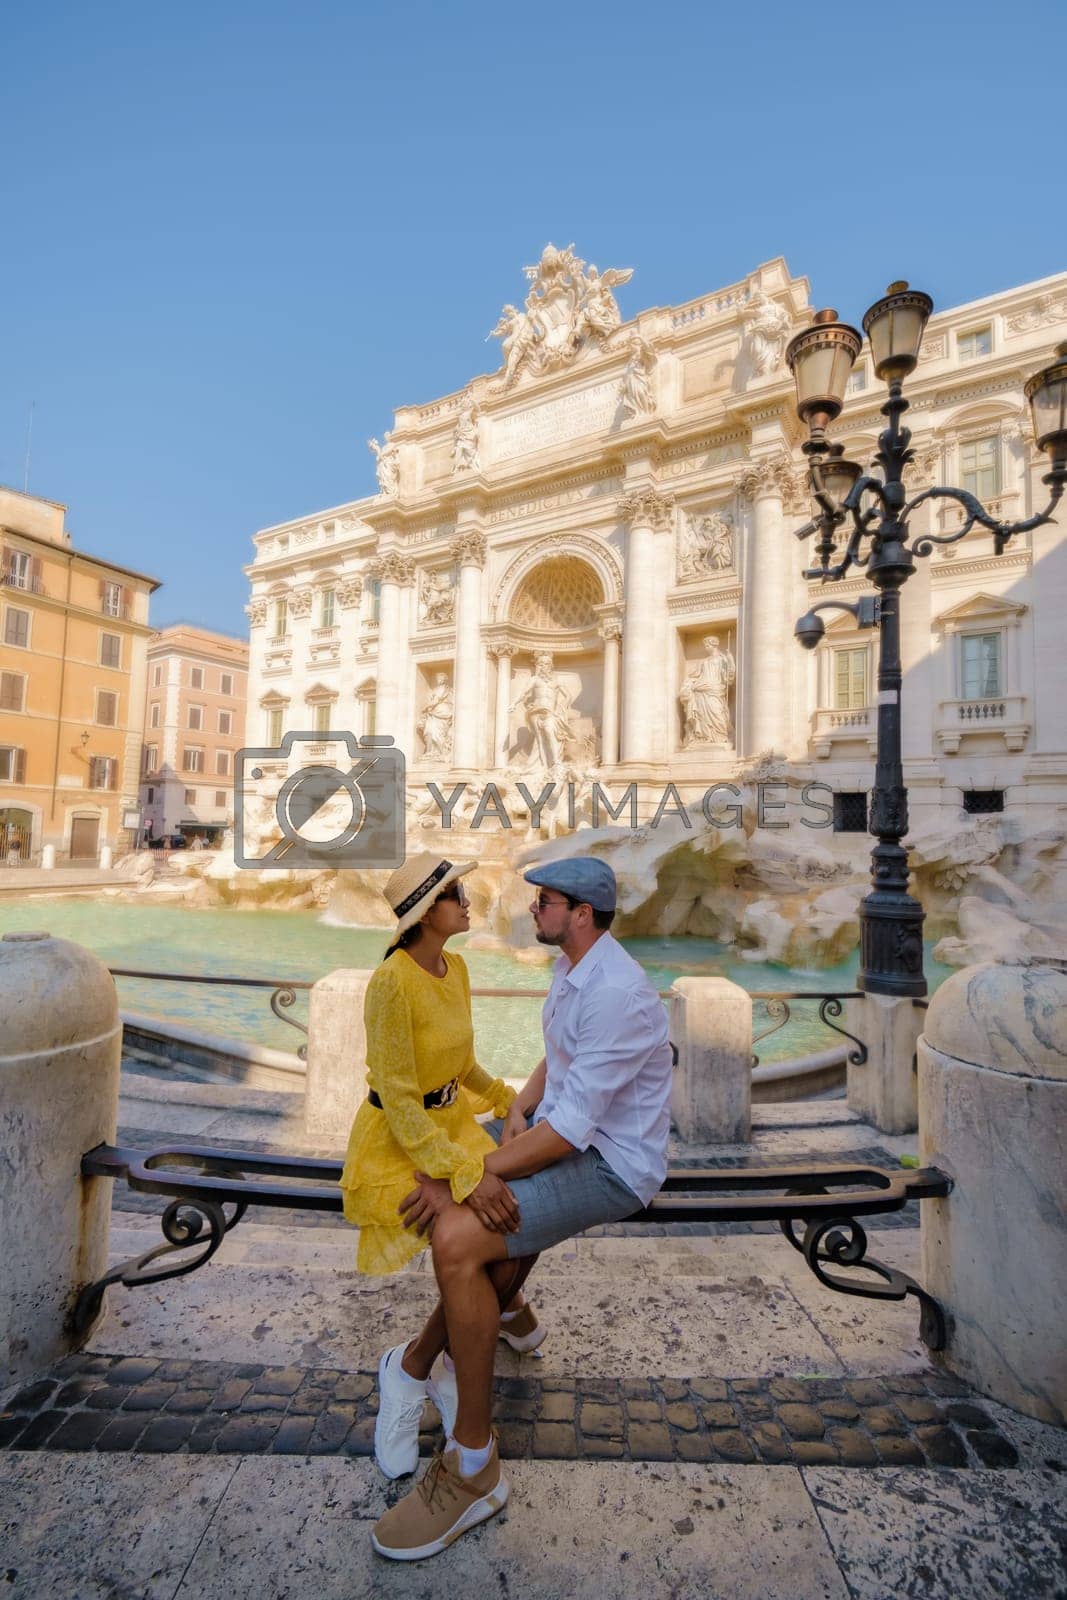 Royalty free image of Men and women at the Trevi Fountain, Rome, Italy. City trip Rome couple on a city trip in Rome. by fokkebok